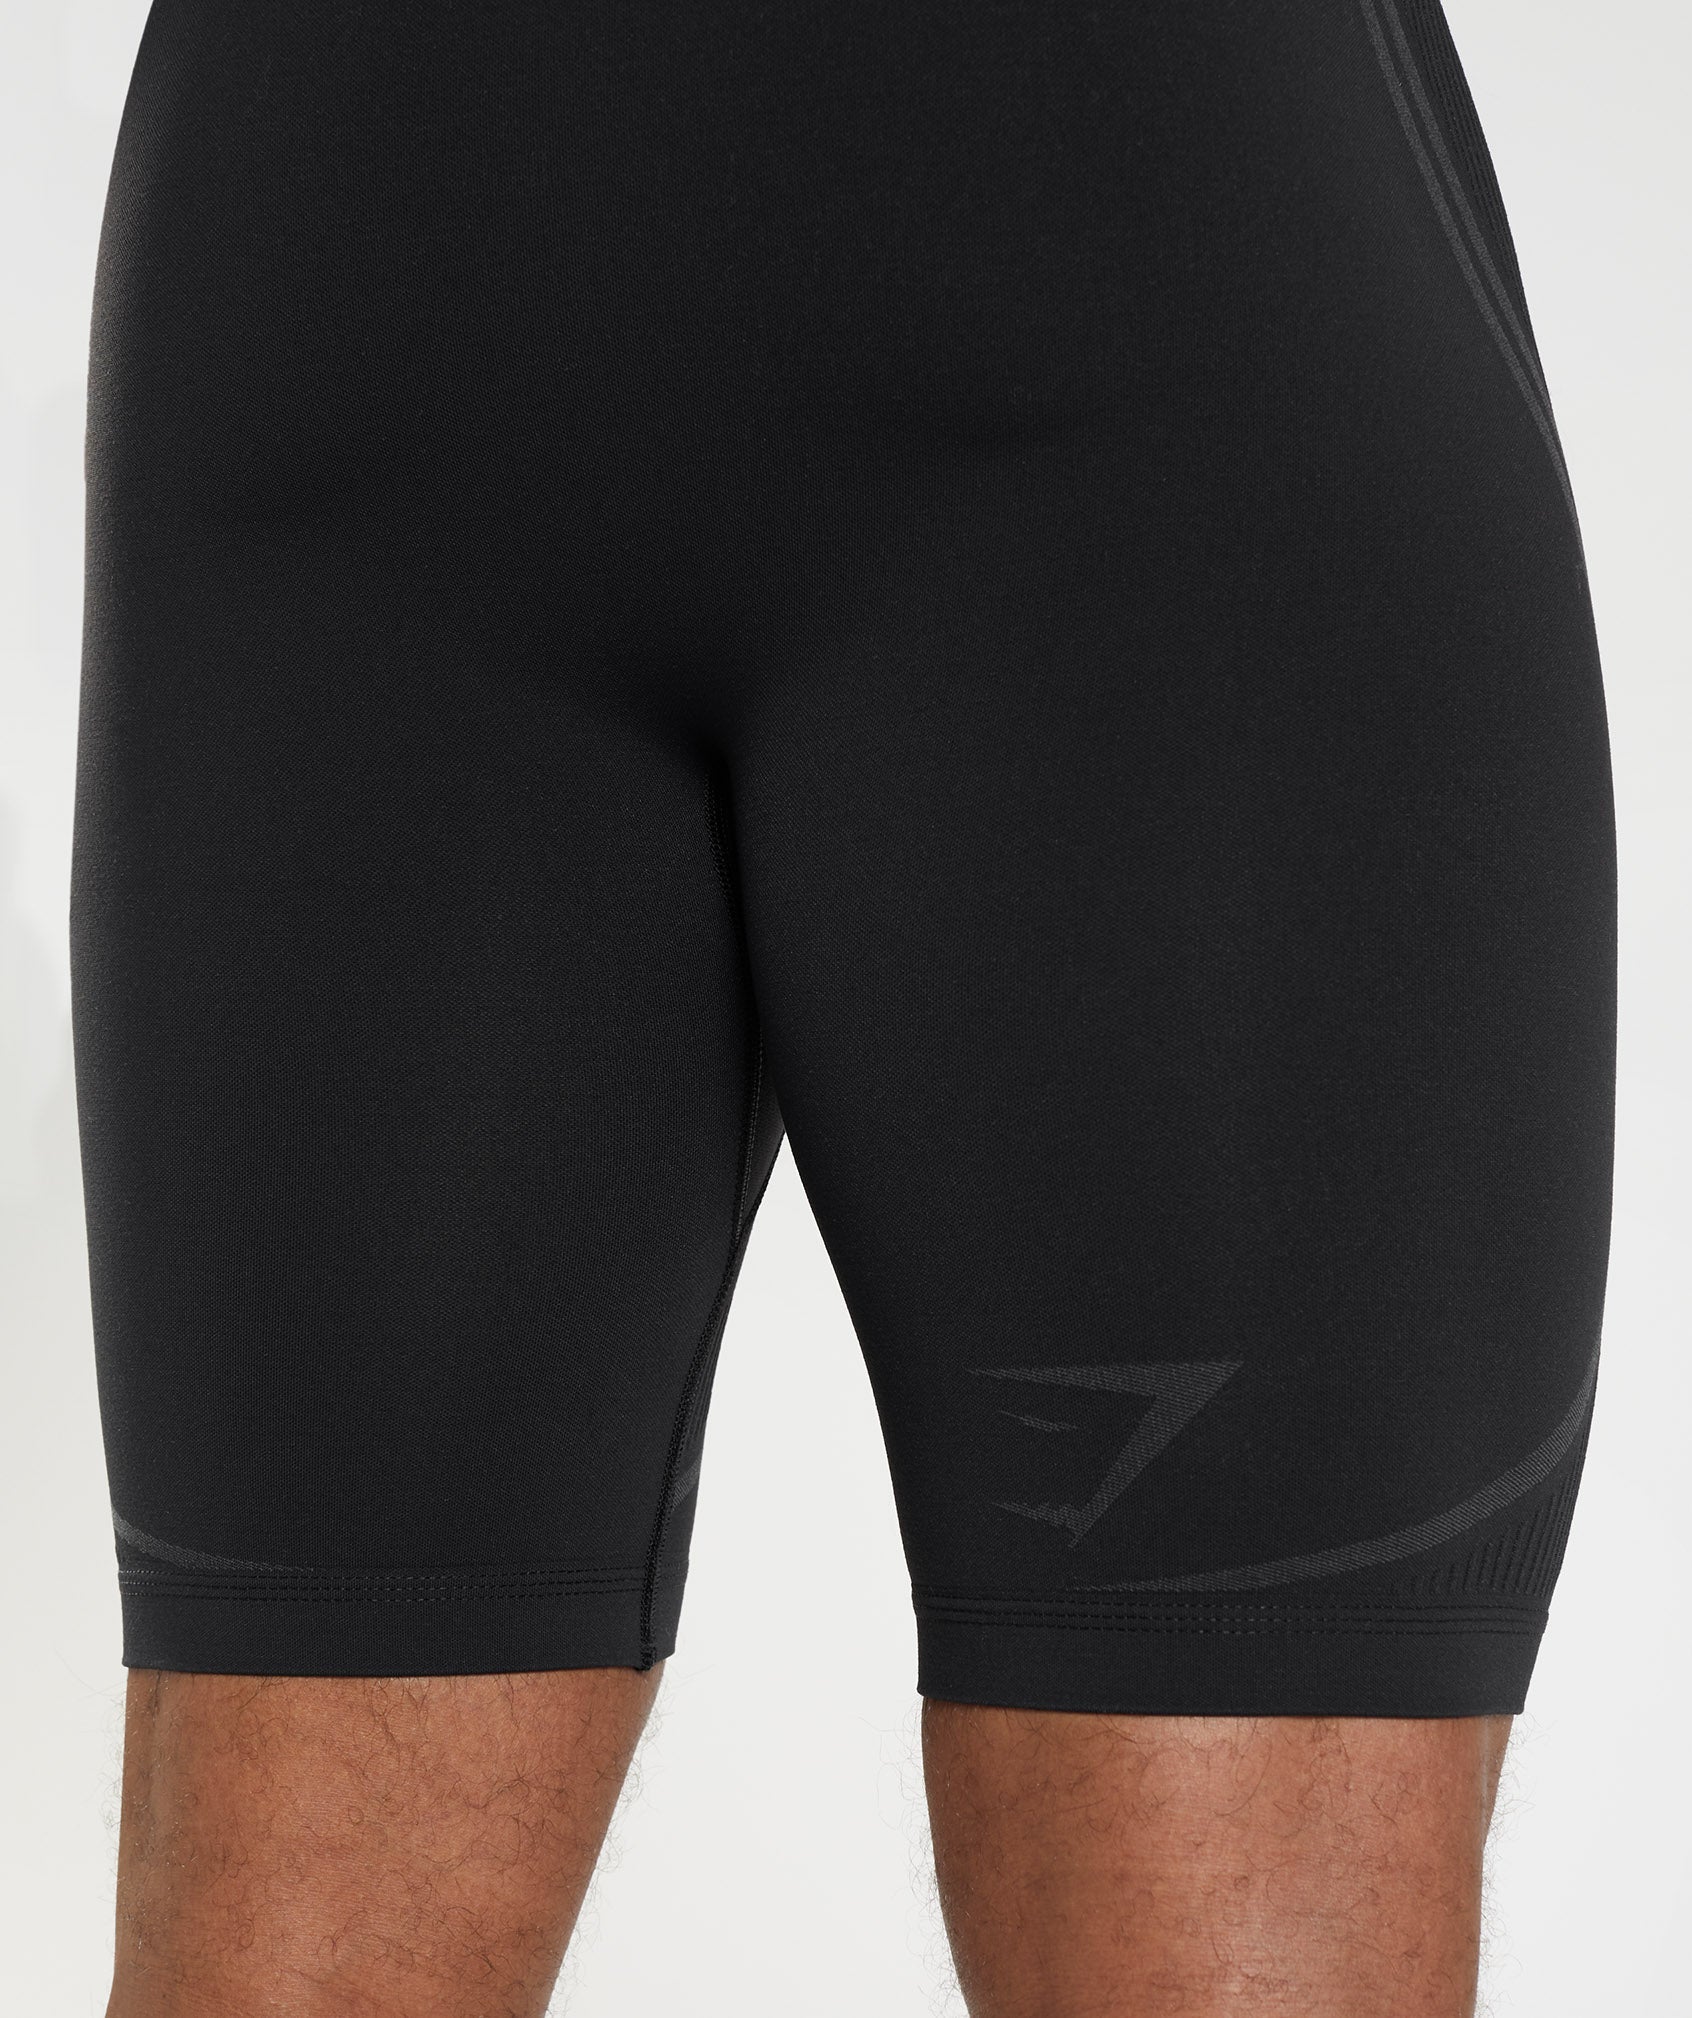 If anyone is looking for men's leggings, these Gymshark 315s are